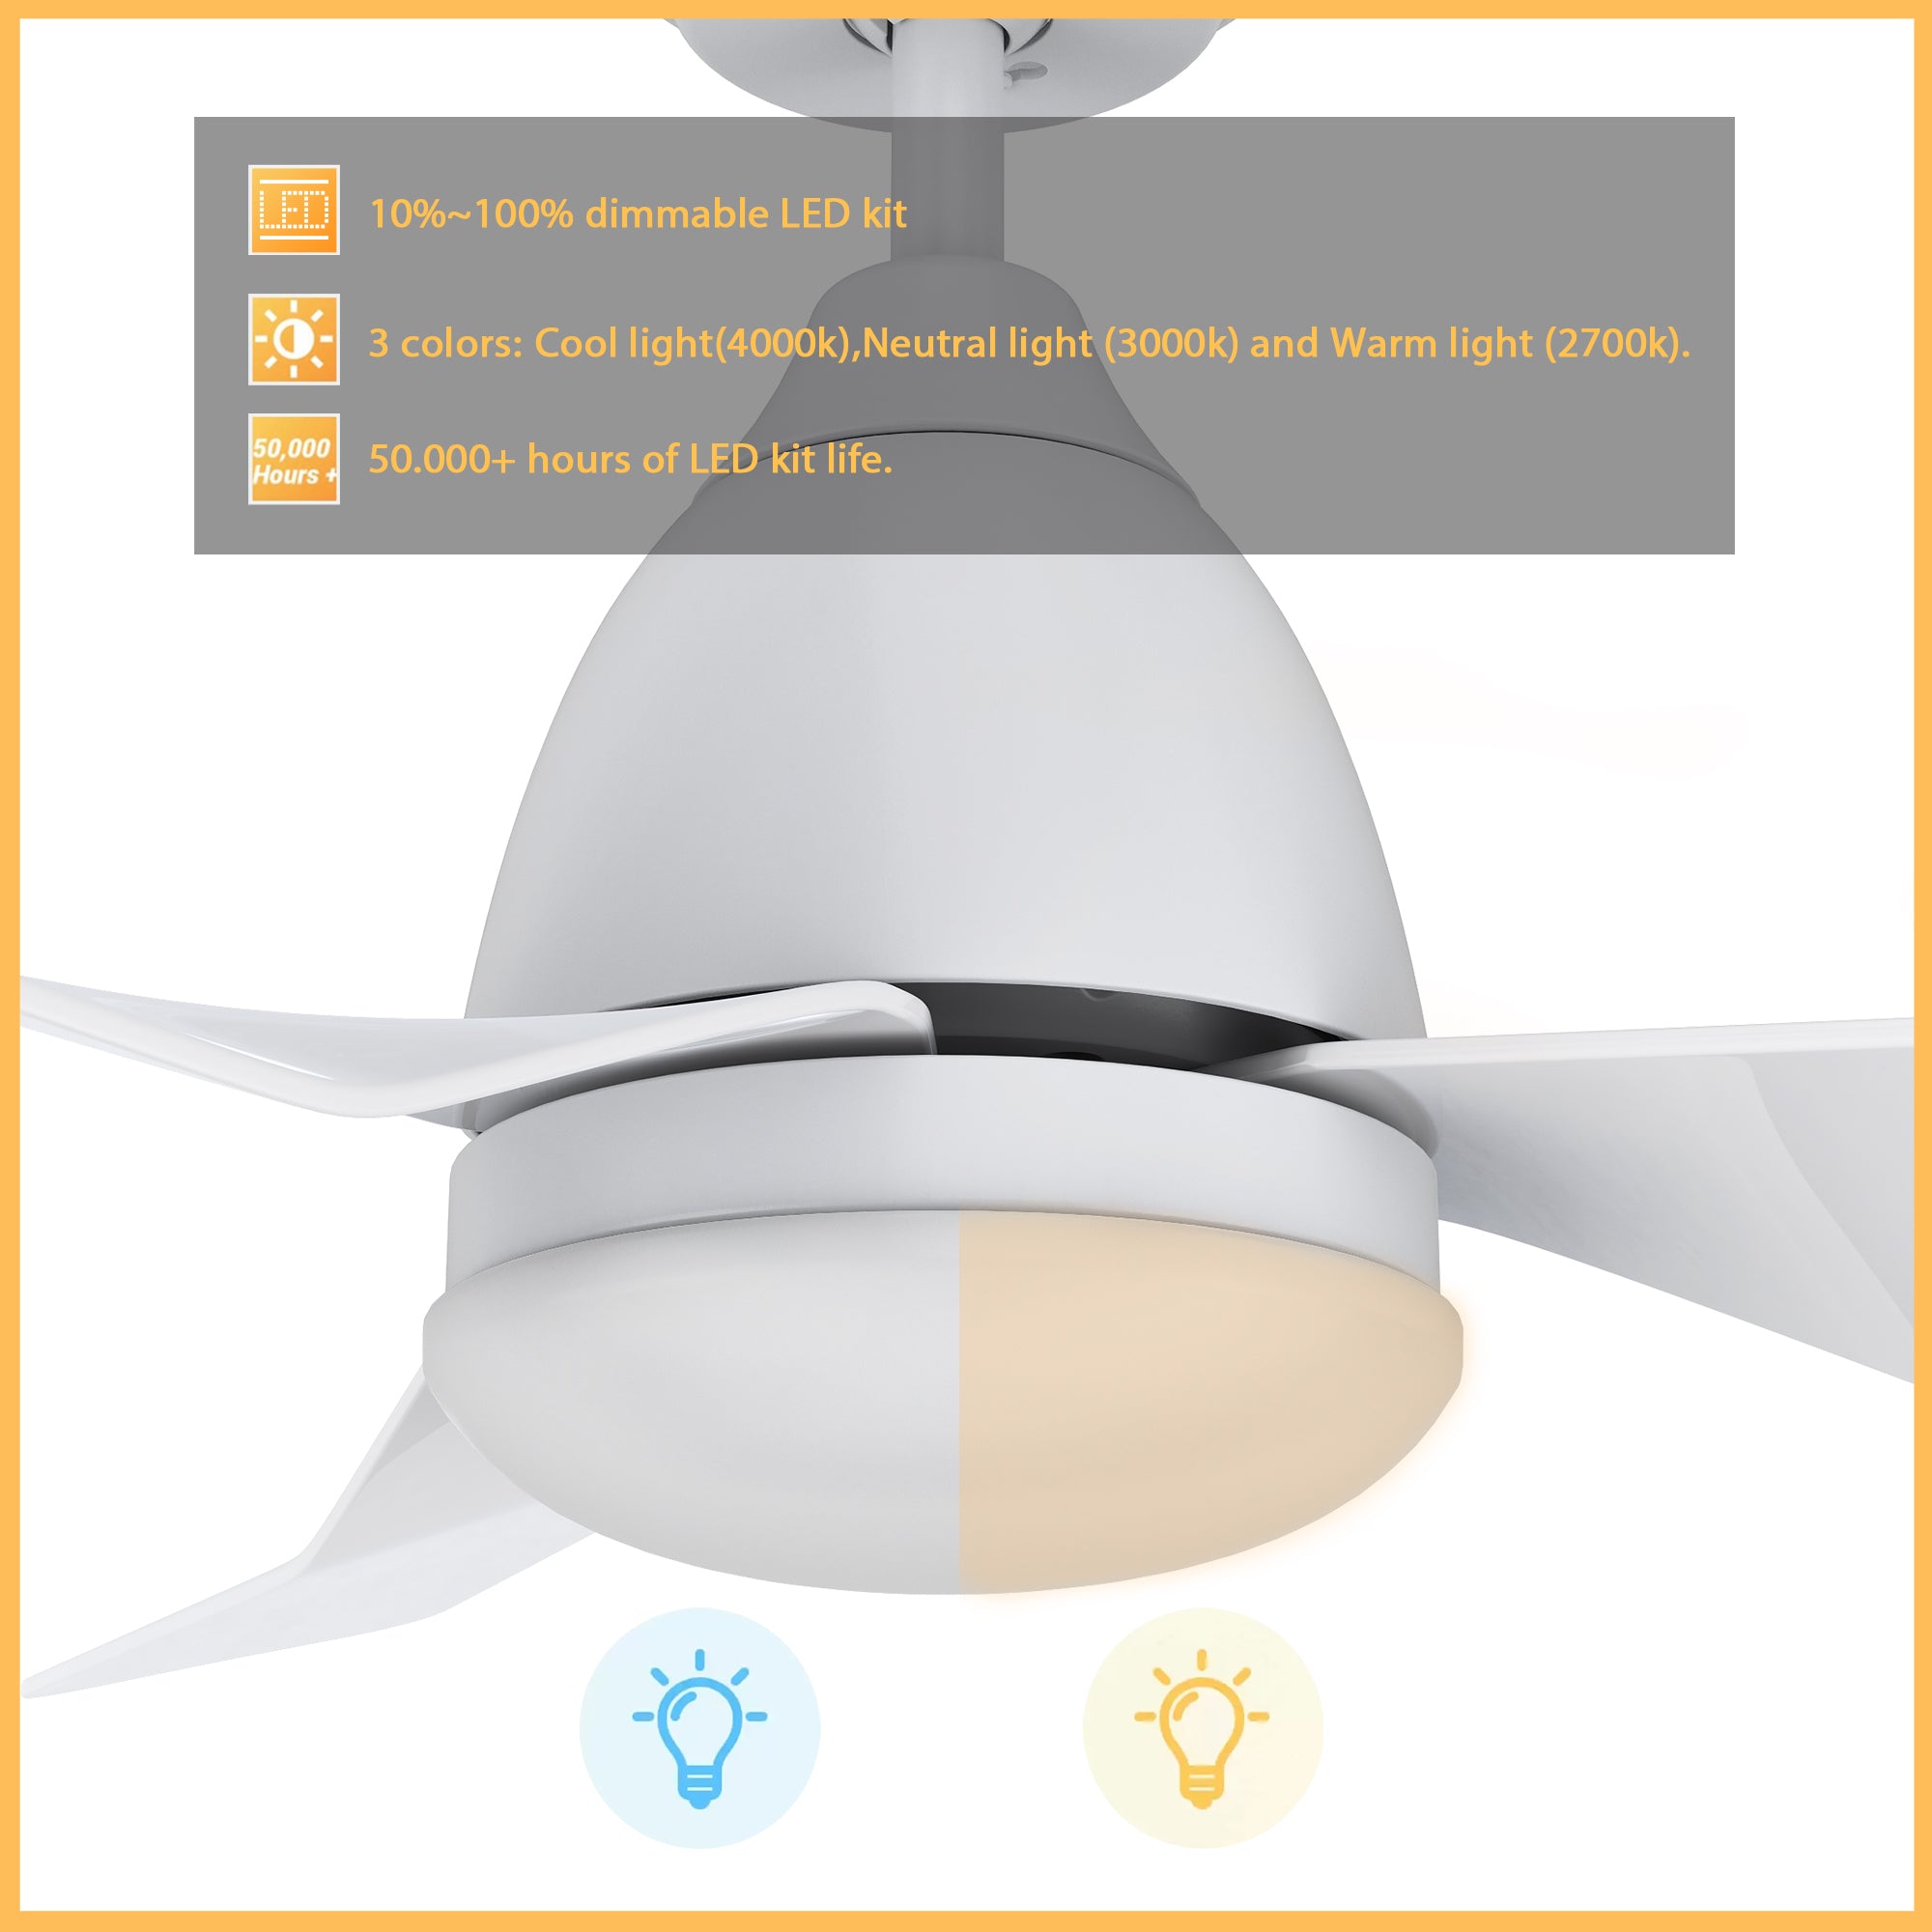 This Silas 44&#39;&#39; smart ceiling fan keeps your space cool, bright, and stylish. It is a soft modern masterpiece perfect for your indoor living spaces. This Wifi smart ceiling fan is a simplicity designing with White finish, use very strong ABS blades and has an integrated 4000K LED cool light. The fan features Remote control, Wi-Fi apps, Siri Shortcut and Voice control technology (compatible with Amazon Alexa and Google Home Assistant ) to set fan preferences.